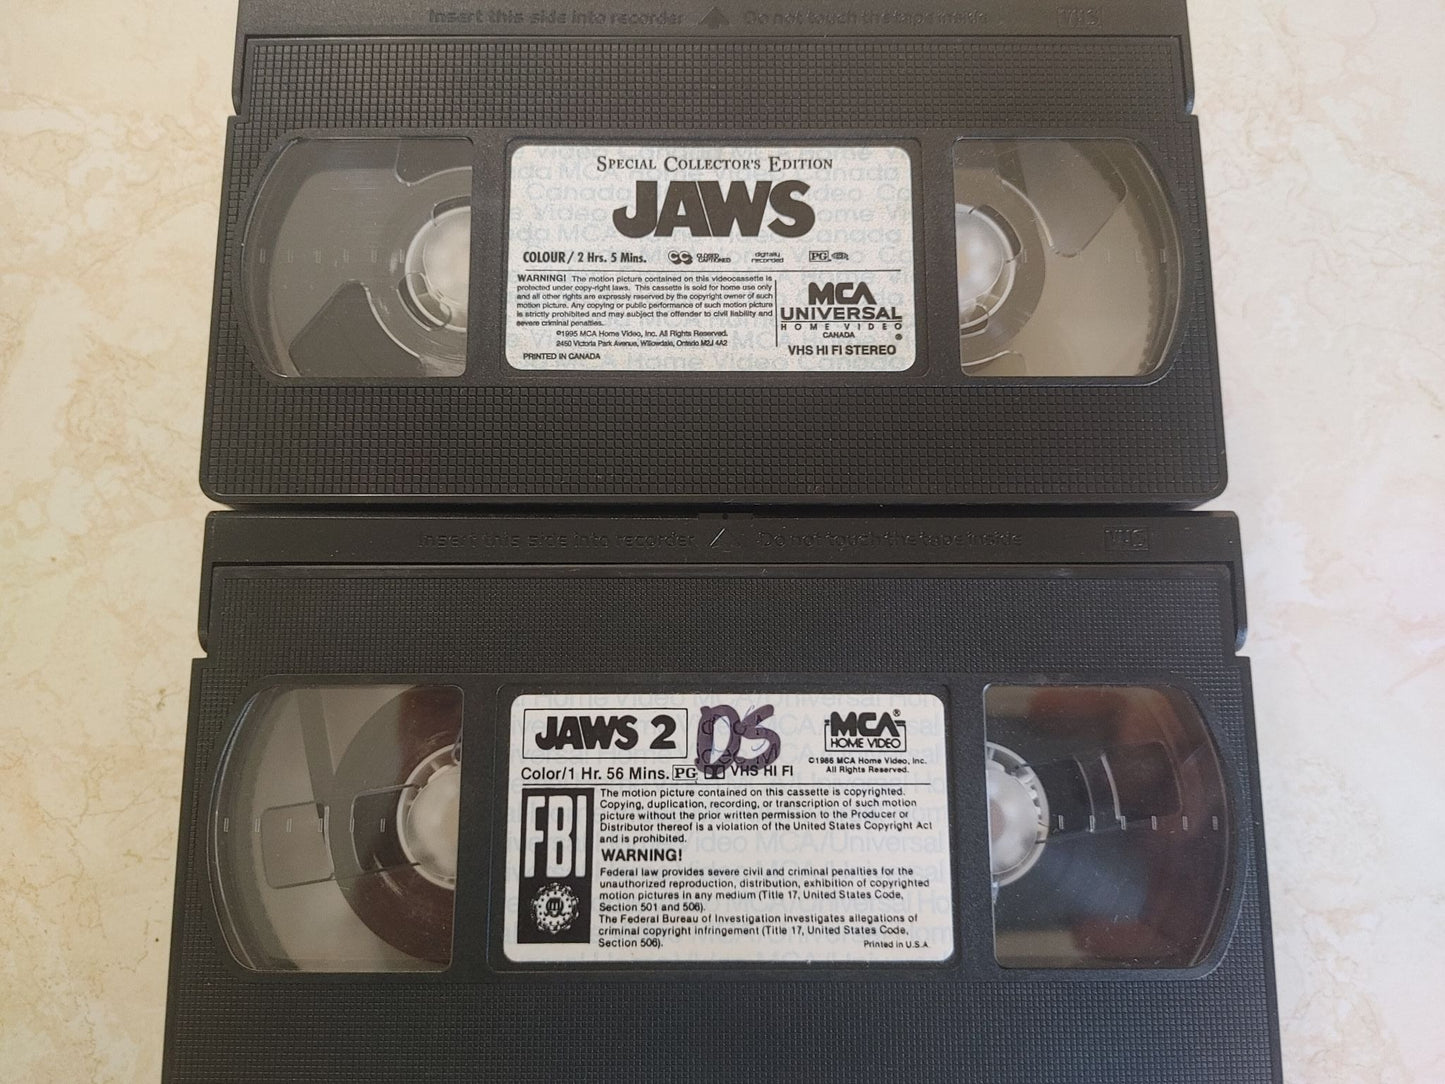 Jaws and Jaws 2 VHS combo sale